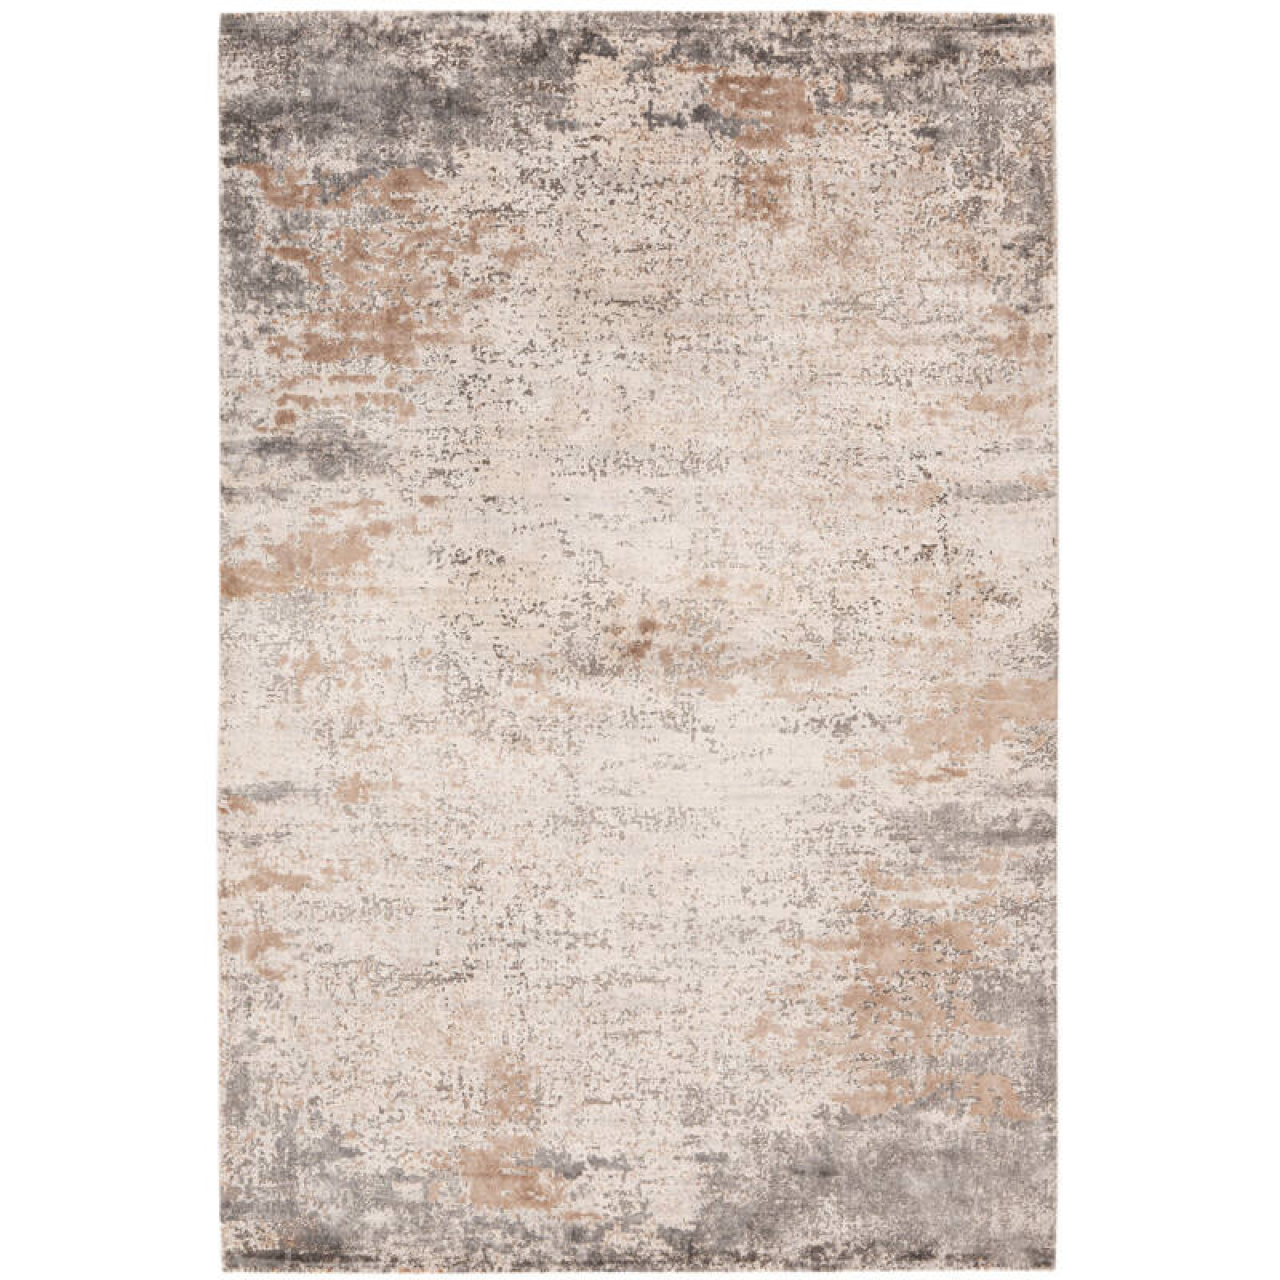 Obsession Haute Couture Jewel 953 Taupe szőnyeg-240x340